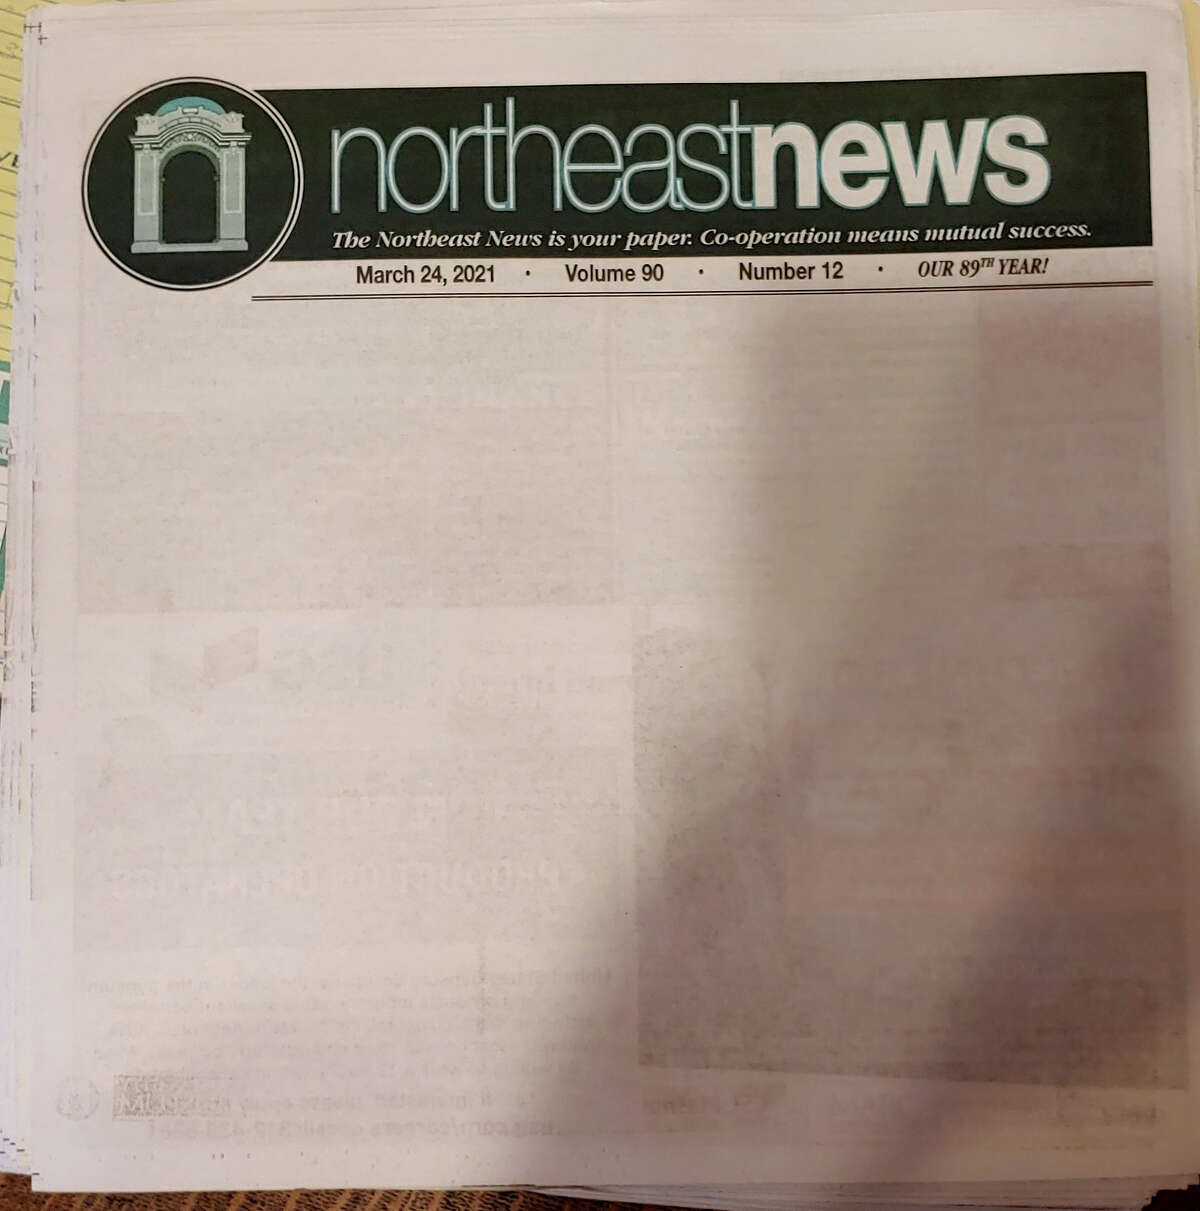 The Northeast News in Kansas City, Mo., printed a blank front page for Wednesday's issue, meant to send a message to its community about the outlet's financial state and importance of hyperlocal journalism.